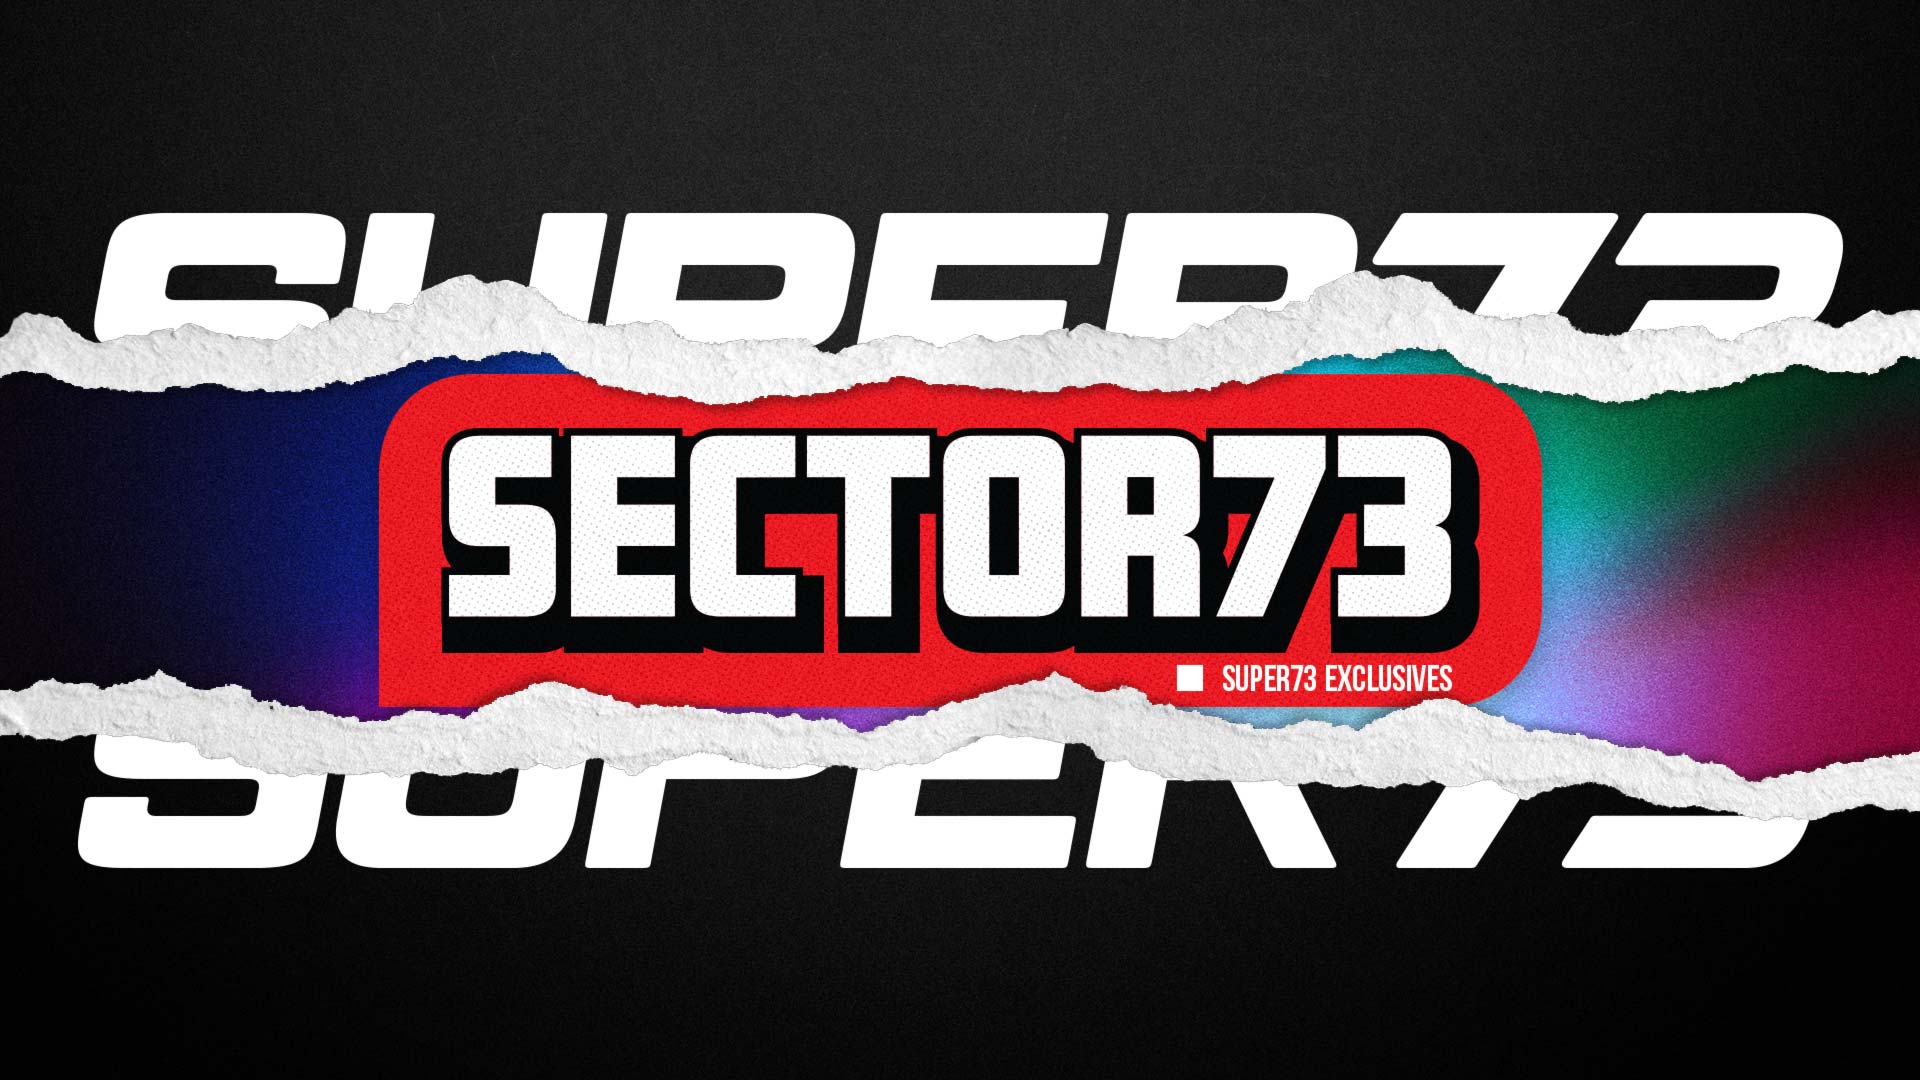 Graphic image of the SECTOR73 logo tearing through the SUPER73 logo